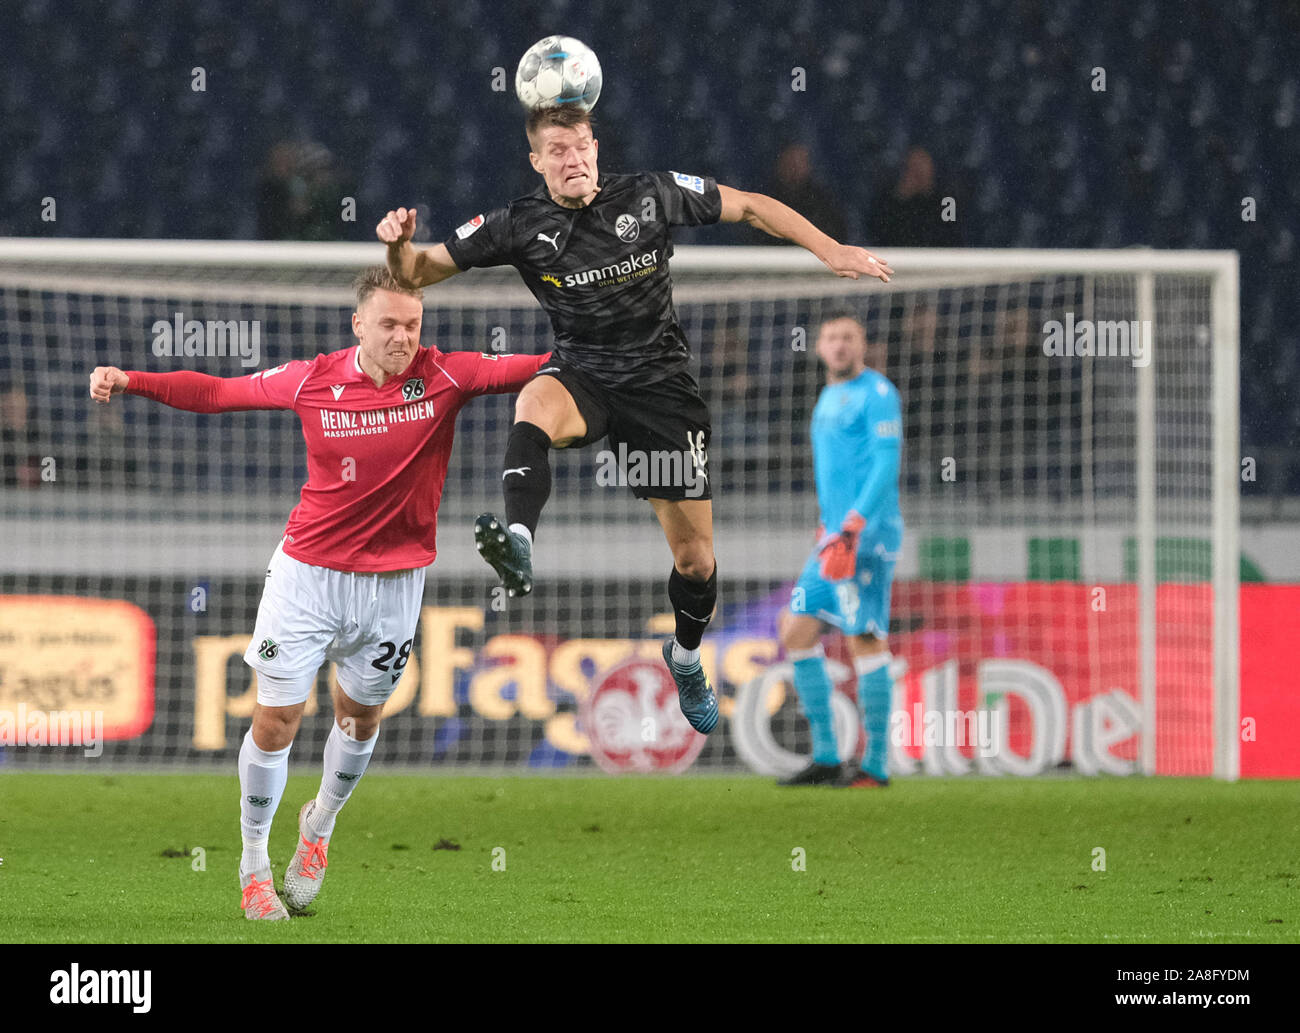 Hanover, Germany. 01st Nov, 2019. Soccer: 2nd Bundesliga, 12th matchday: Hannover 96 - SV Sandhausen in the HDI-Arena in Hannover. Hannovers Marcel Franke (l) and Sandhausens Kevin Behrens fight for the ball. Credit: Peter Steffen/dpa - IMPORTANT NOTE: In accordance with the requirements of the DFL Deutsche Fußball Liga or the DFB Deutscher Fußball-Bund, it is prohibited to use or have used photographs taken in the stadium and/or the match in the form of sequence images and/or video-like photo sequences./dpa/Alamy Live News Stock Photo